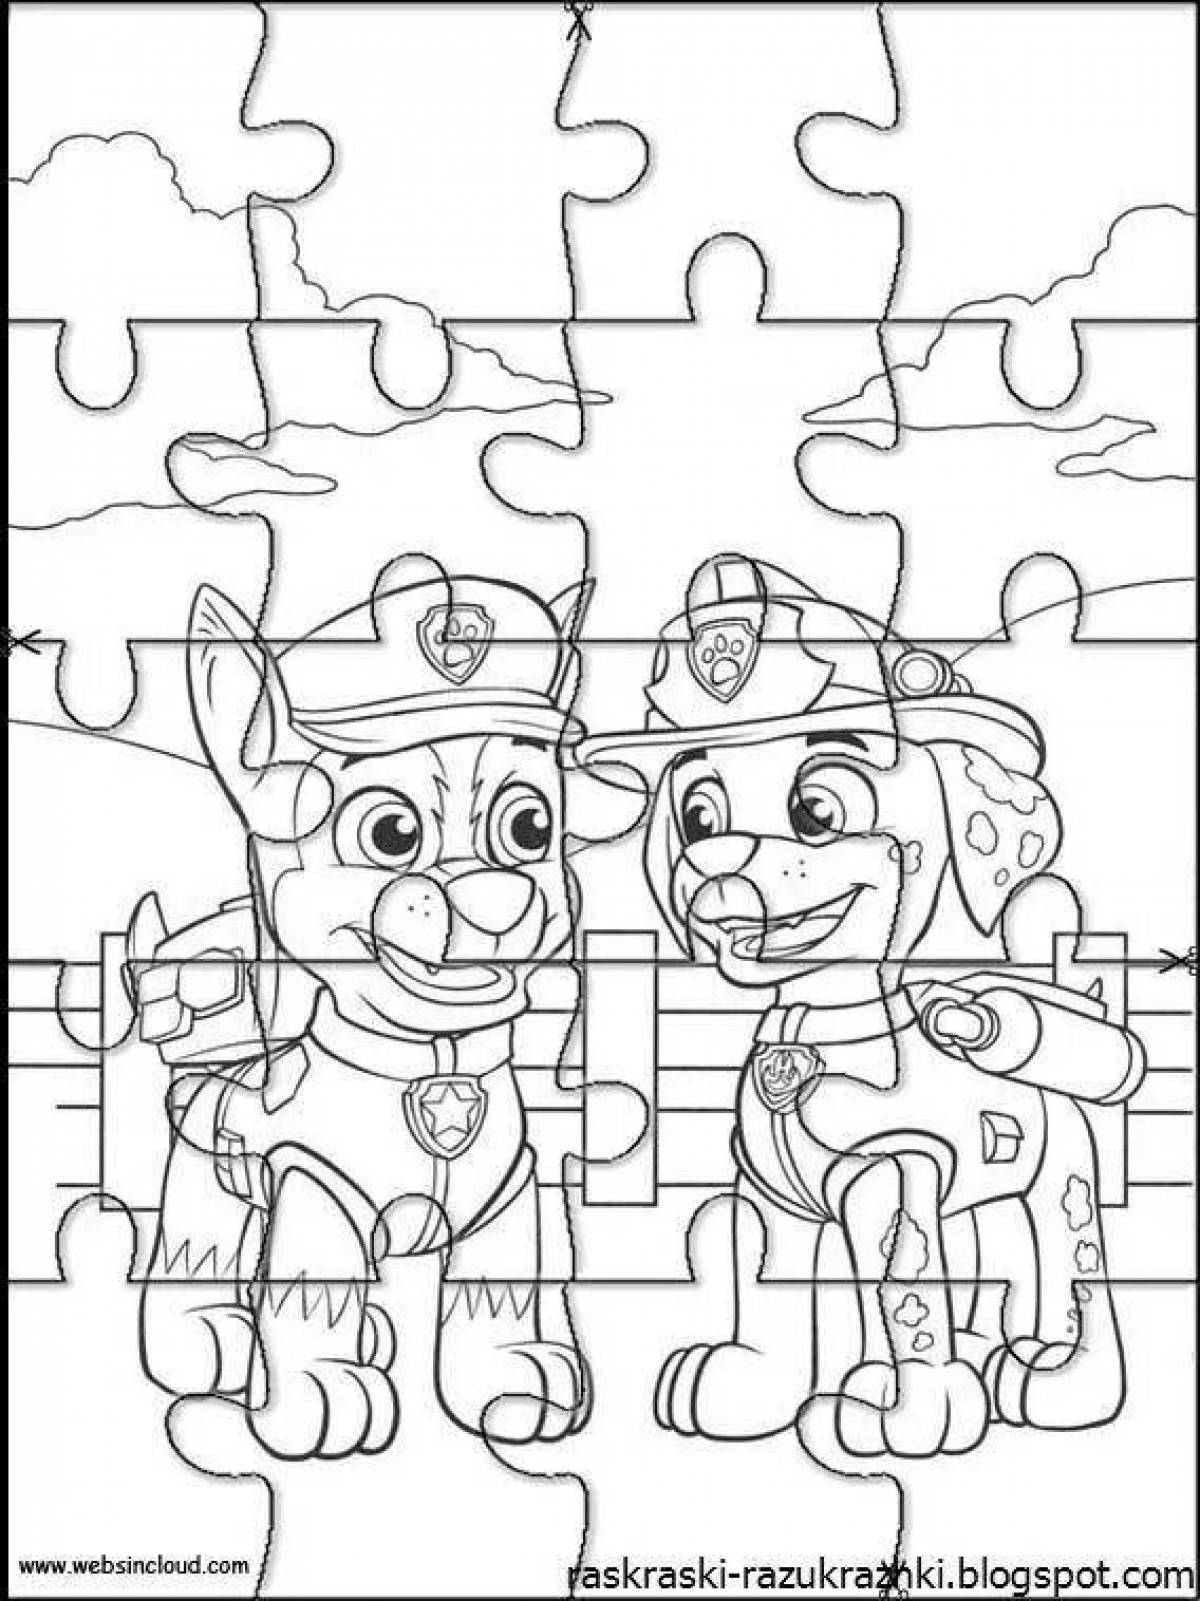 Nice puzzle coloring pages